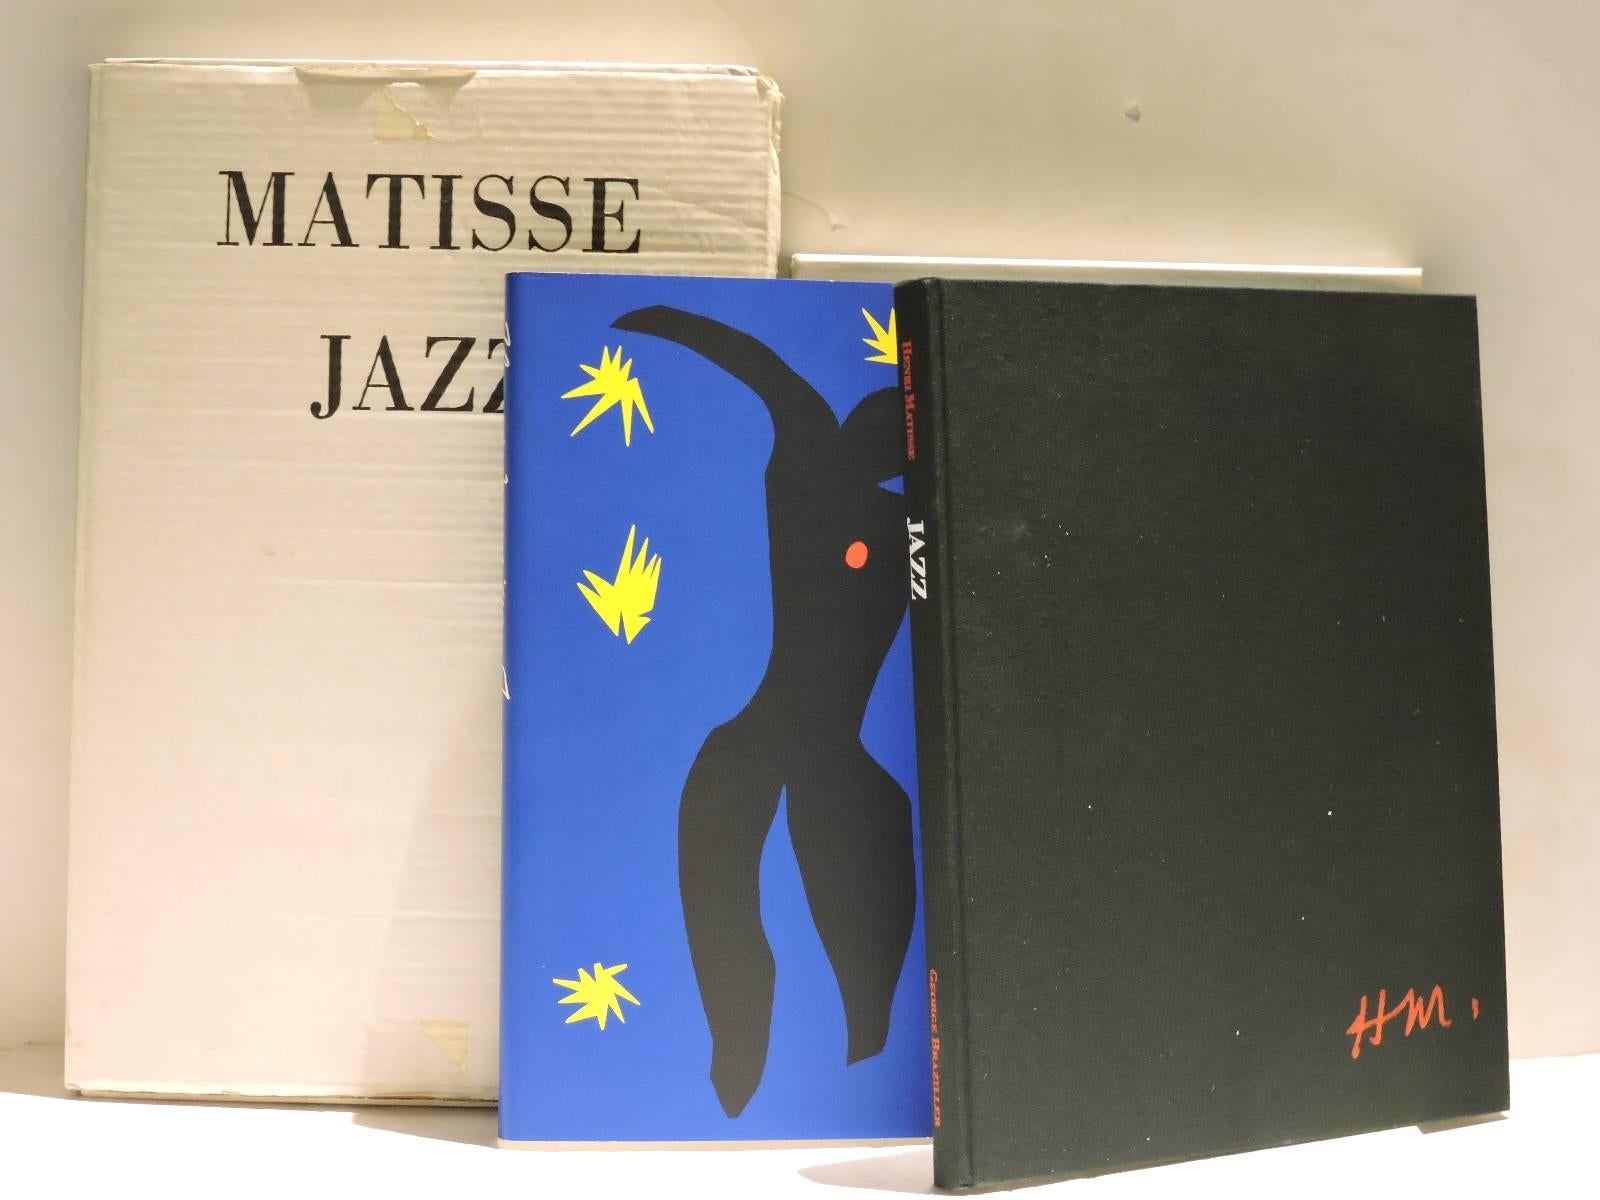 Jazz by Henri Matisse - Georges Brazilier - 1983 - 1st edition portfolio. An exceptional copy of this profusely illustrated book in brilliant color with an introduction by Riva Castleman with text by Henri Matisse translated from the French by